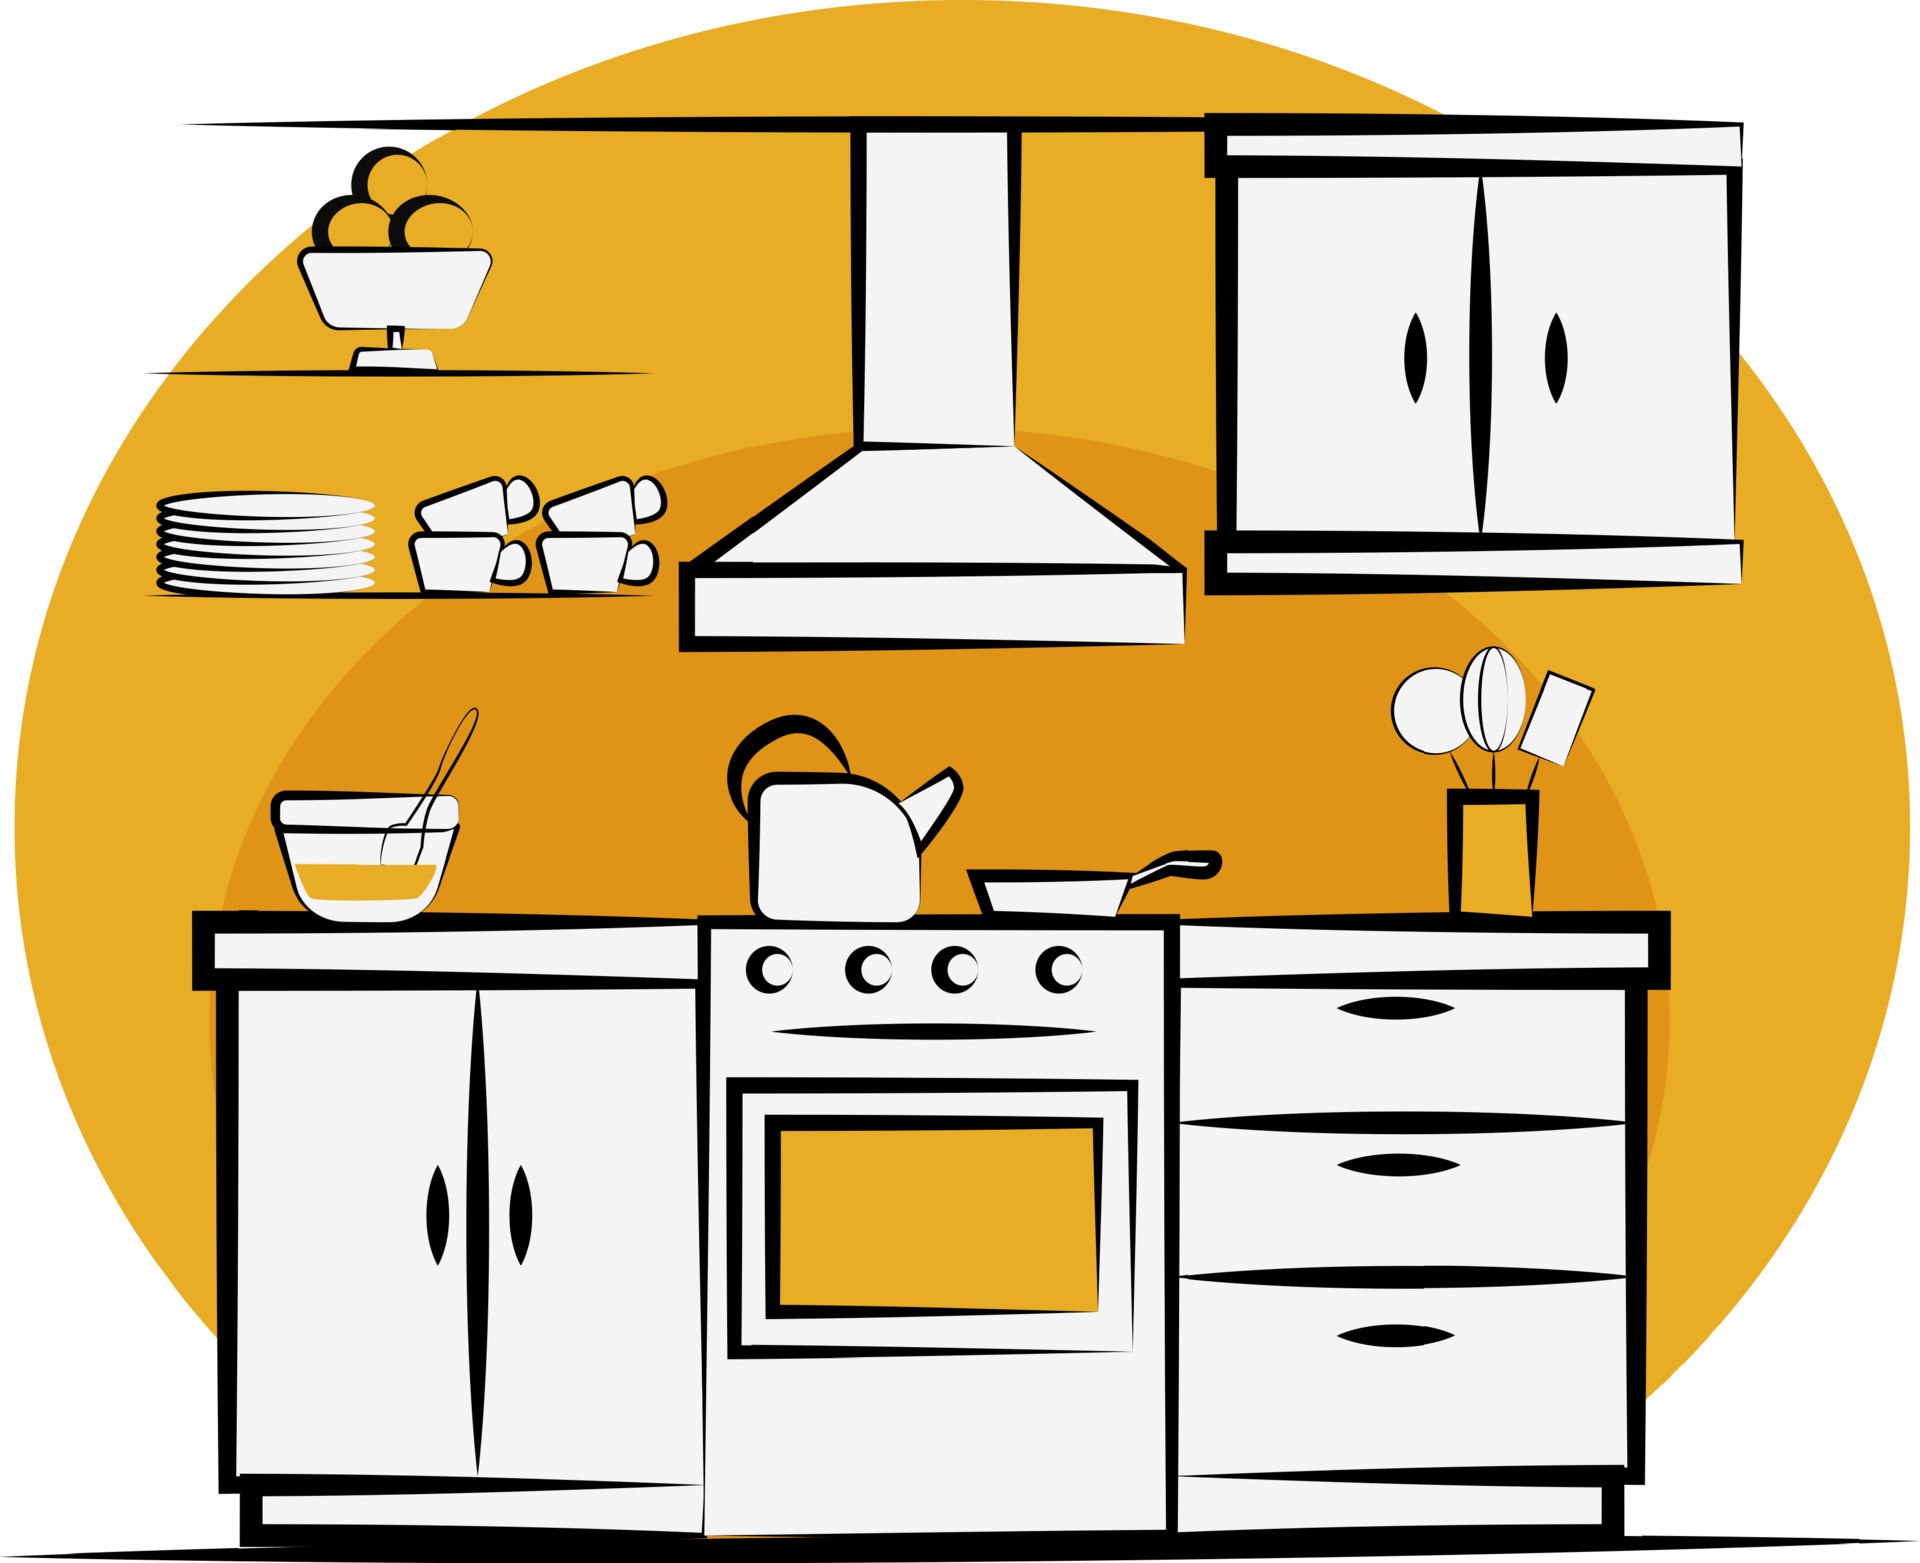 Monochrome sketch kitchen cabinets Royalty Free Vector Image